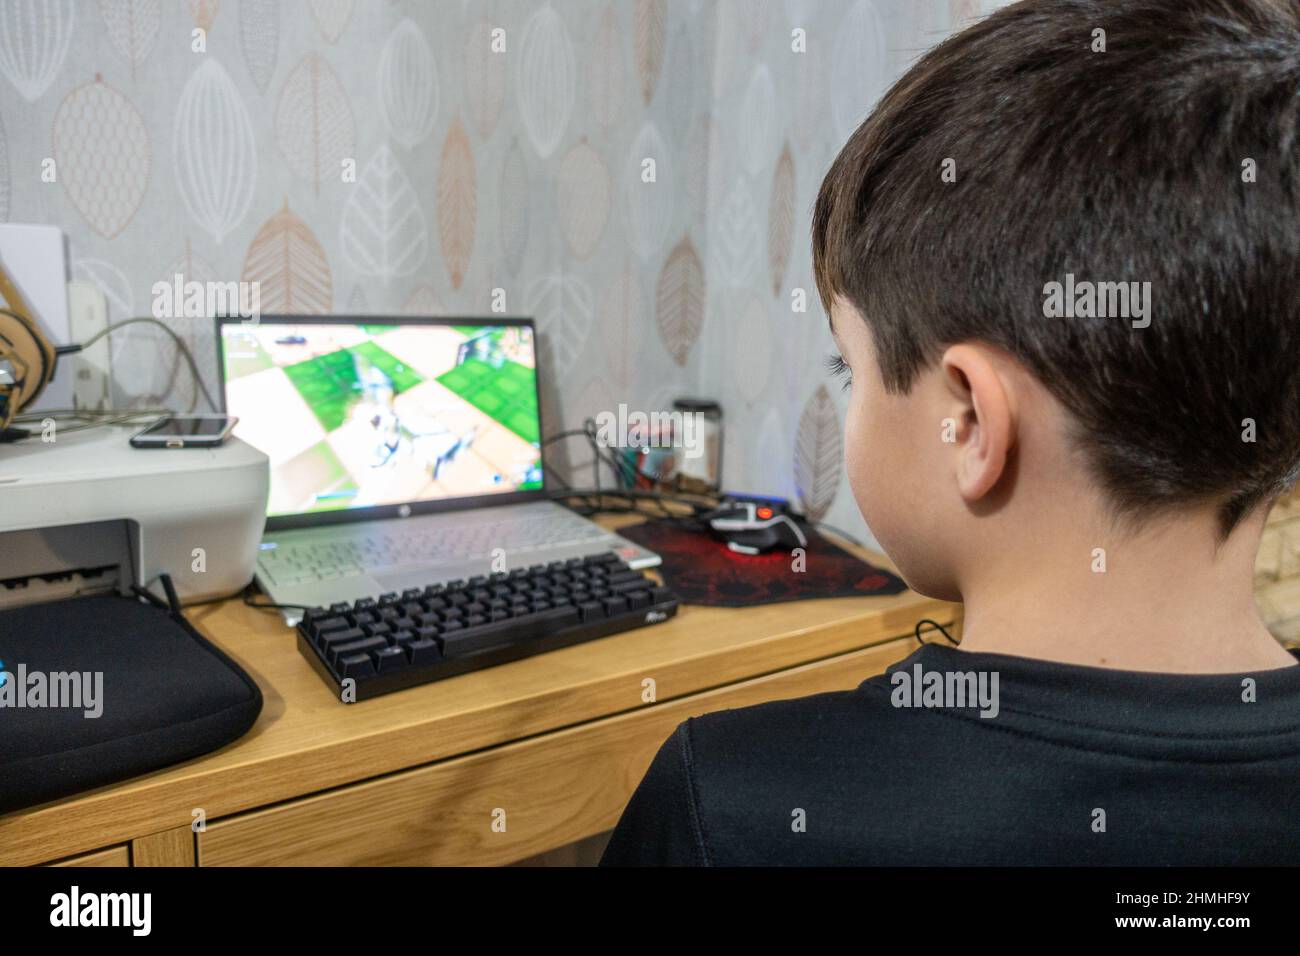 A boy plays a computer game on a laptop computer, seen over the shoulder from behind. Stock Photo